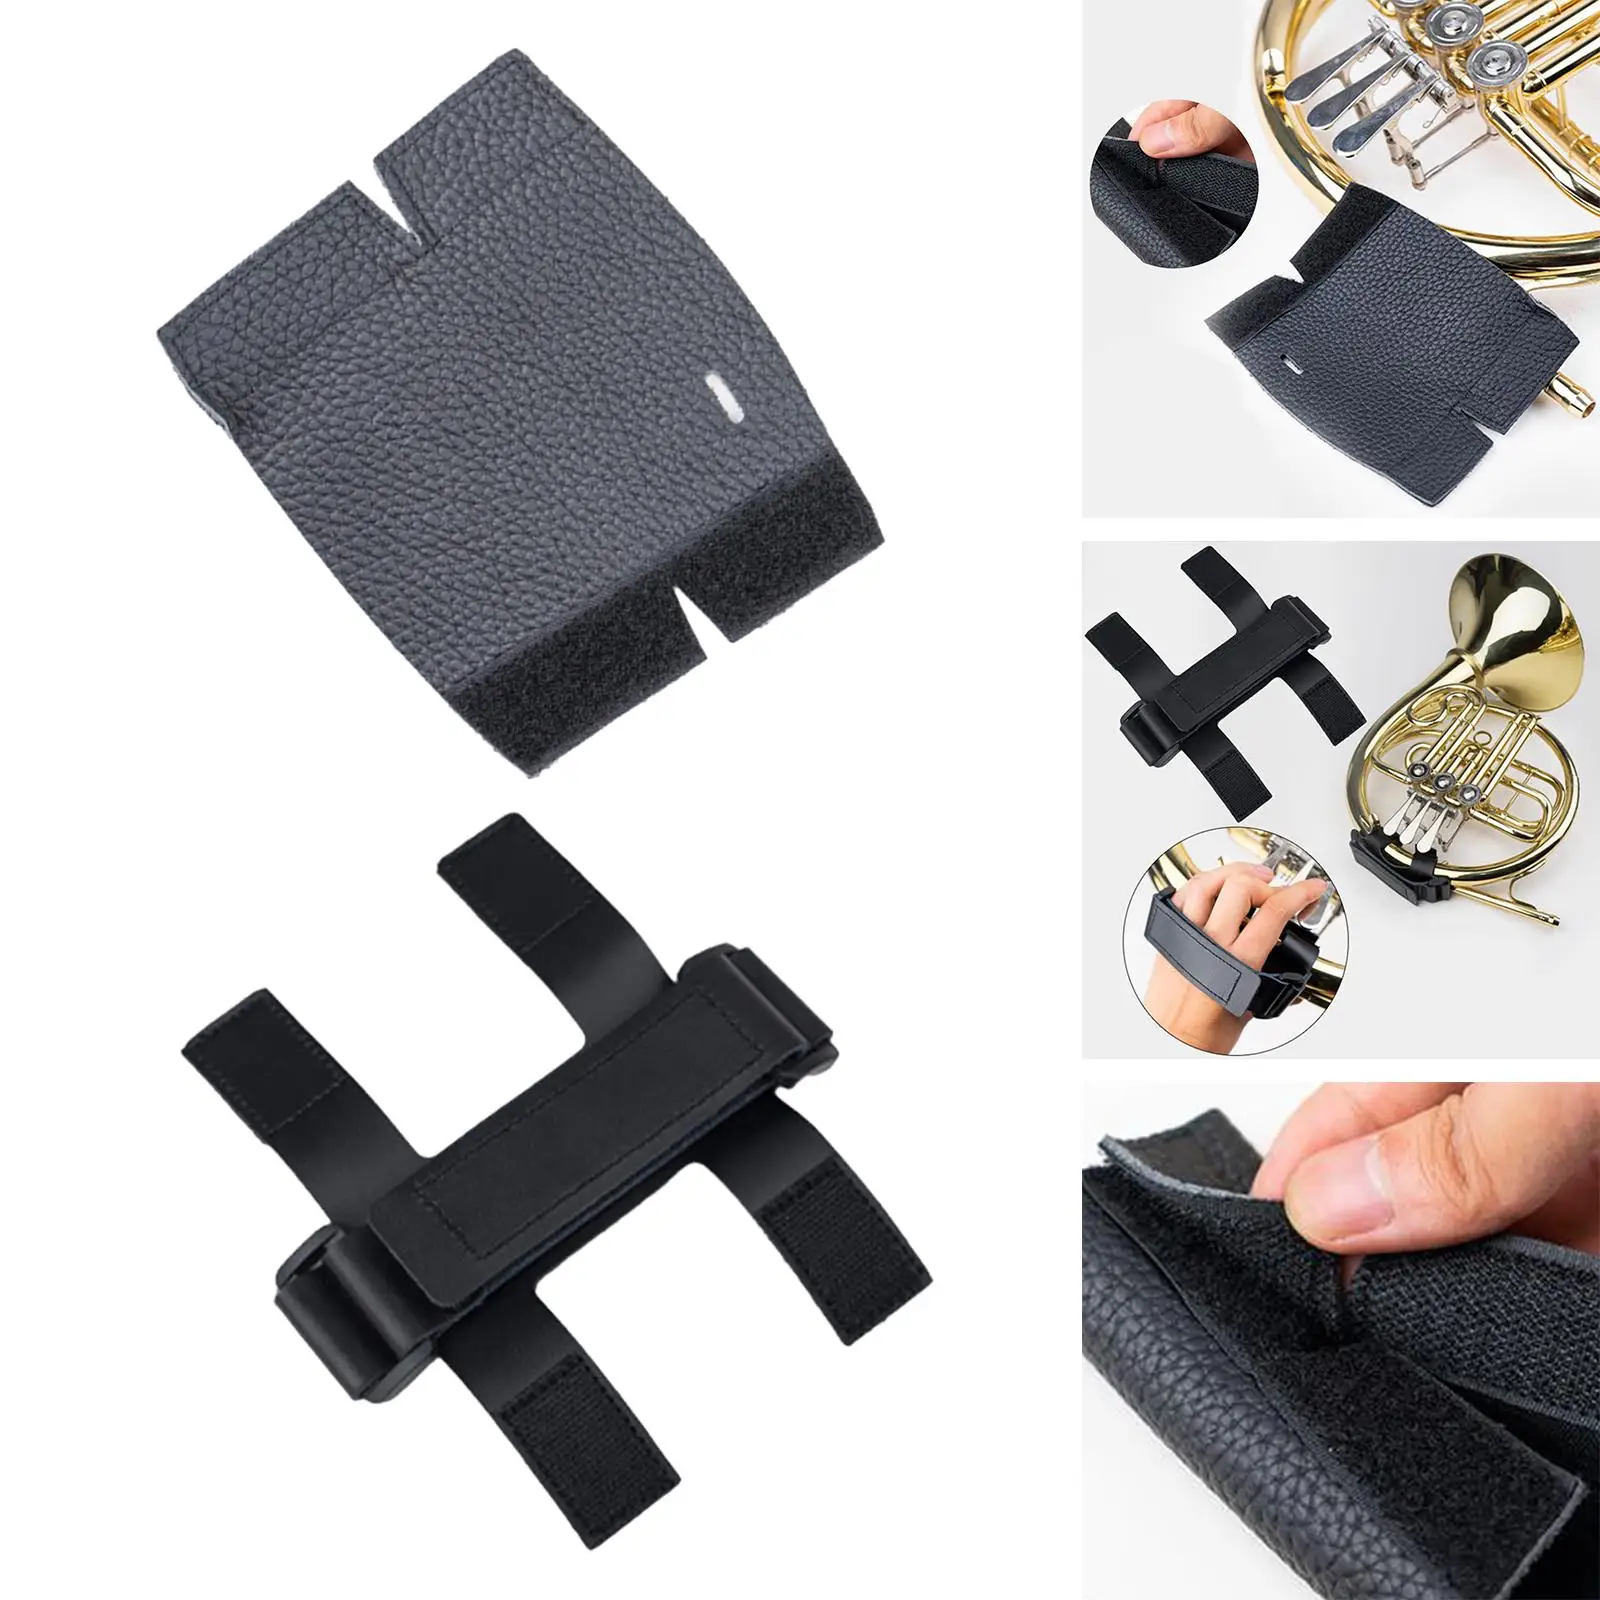 French Horn Hand Guard Adjustable Non Slip PU Leather Wrap Cover Protective Cover for Stage Tour Performance Exercise Practice